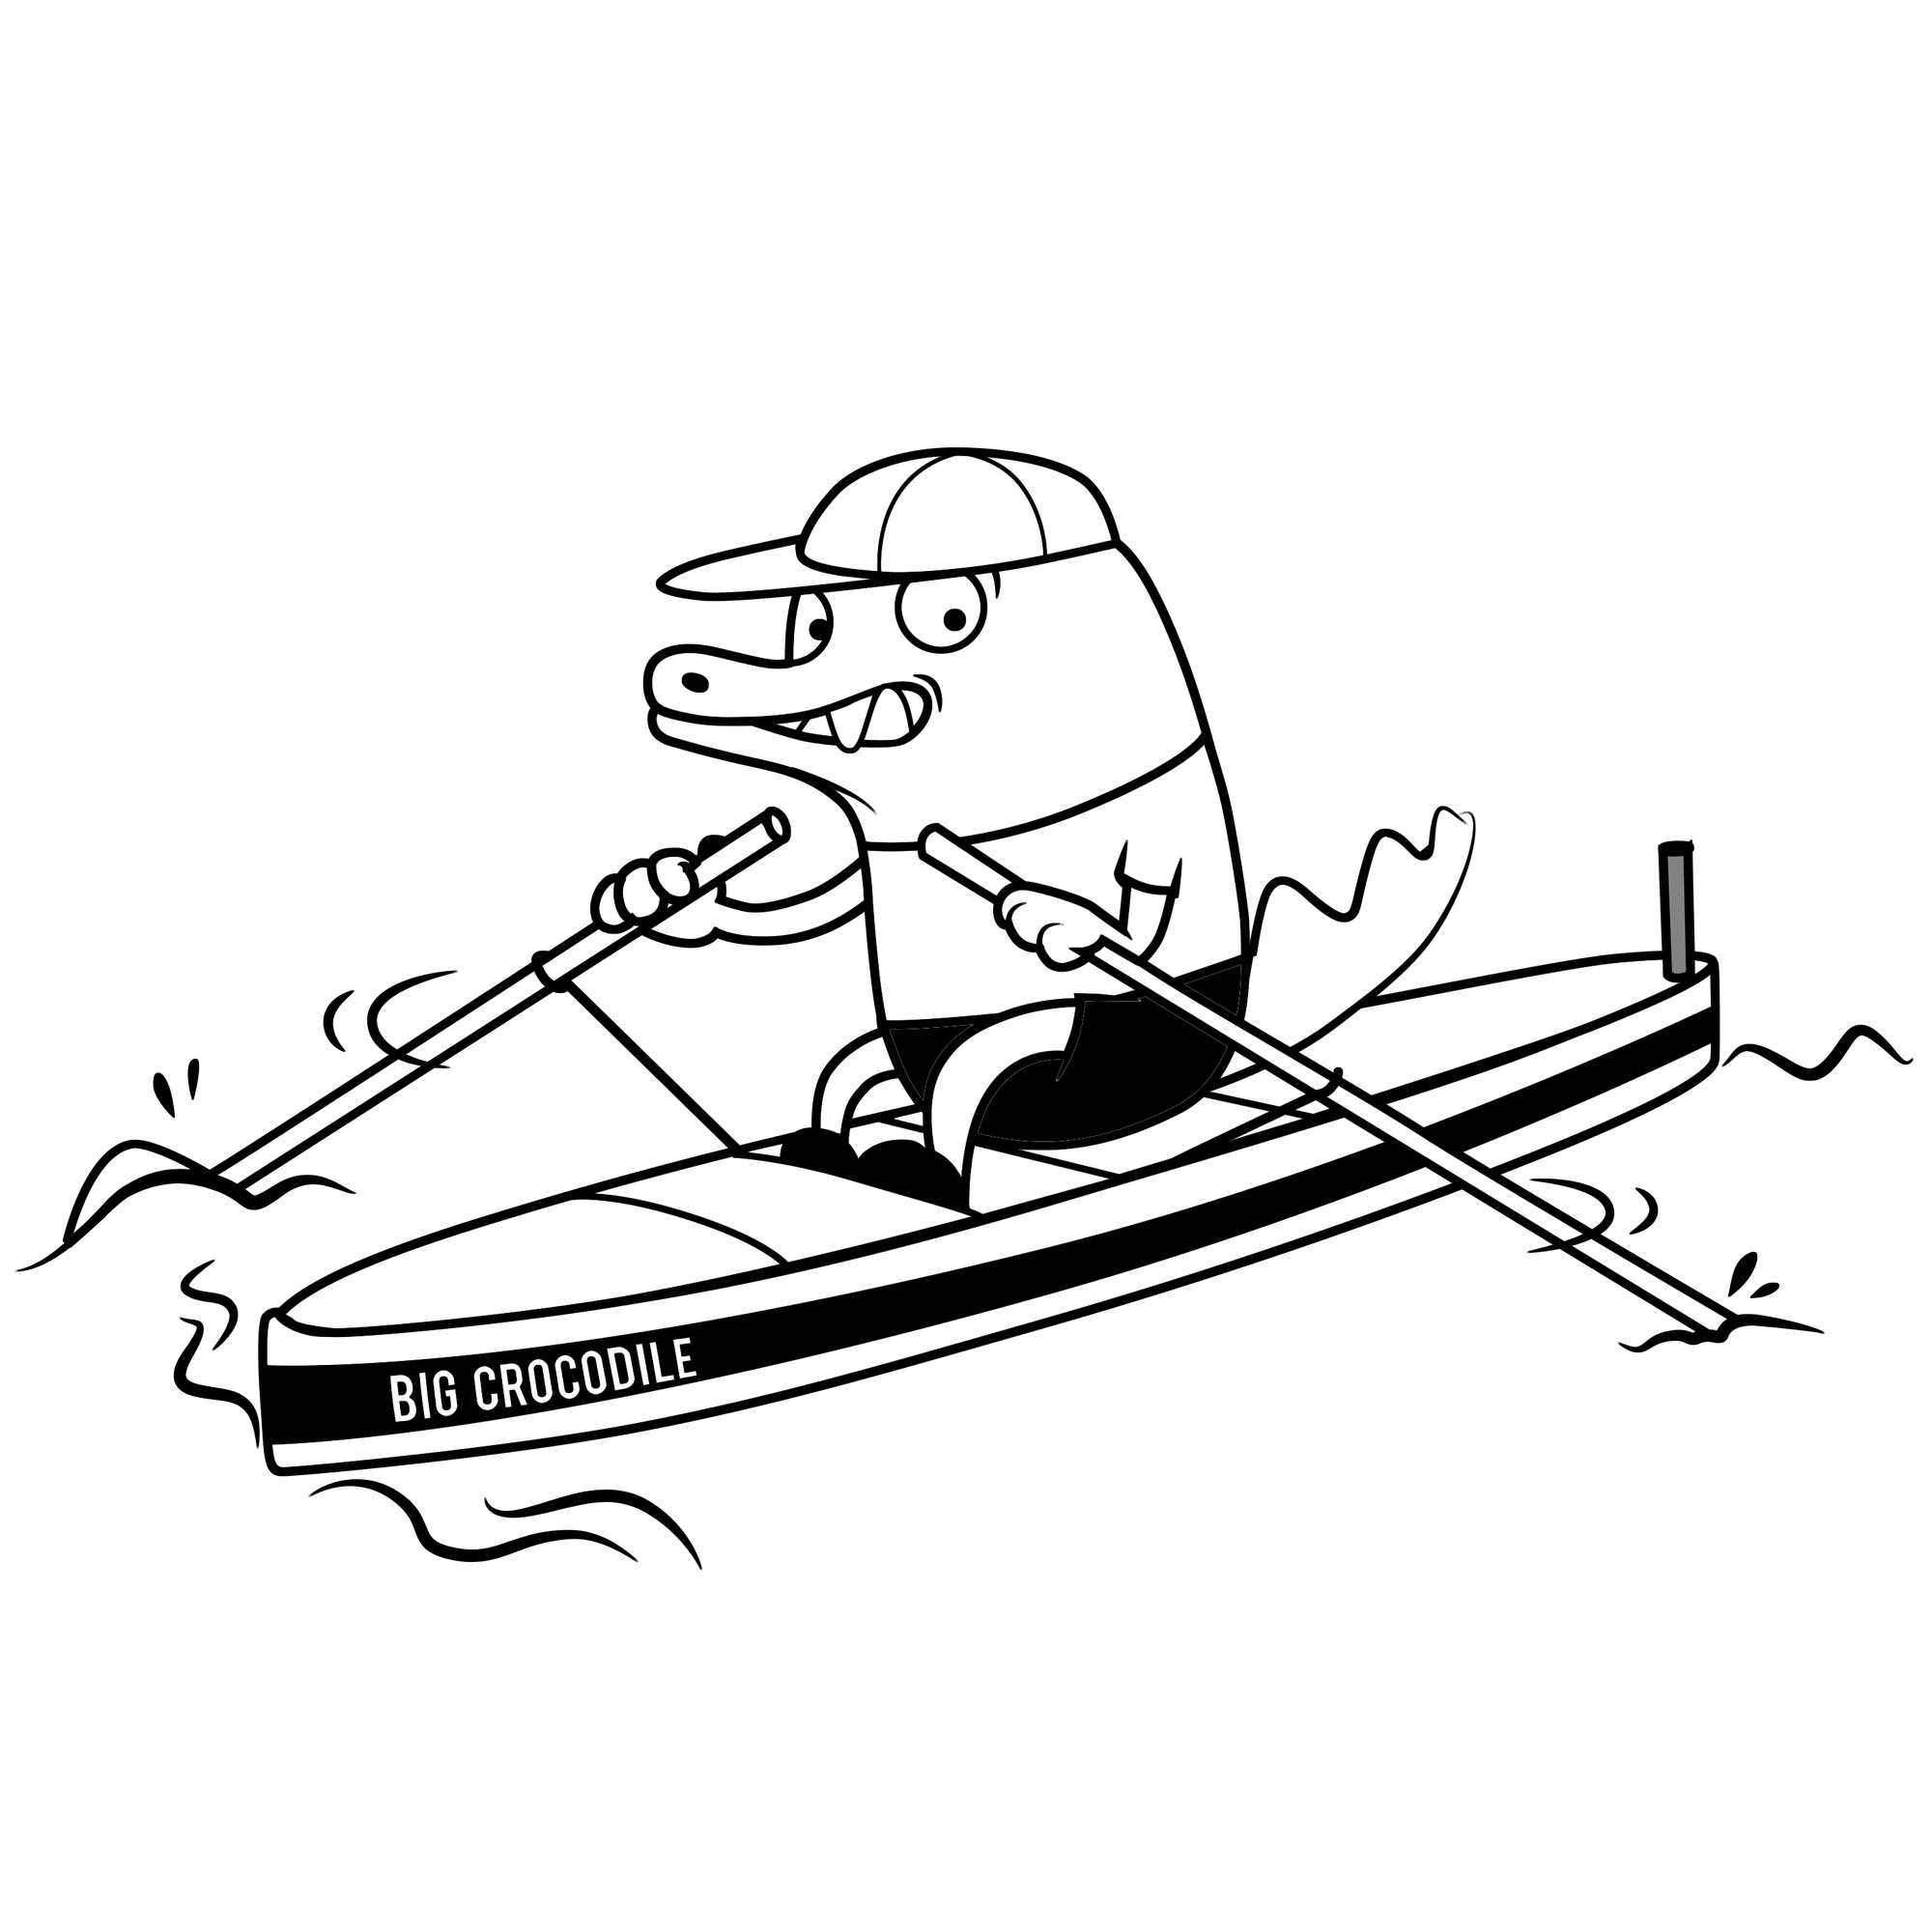 Rower (Boat)